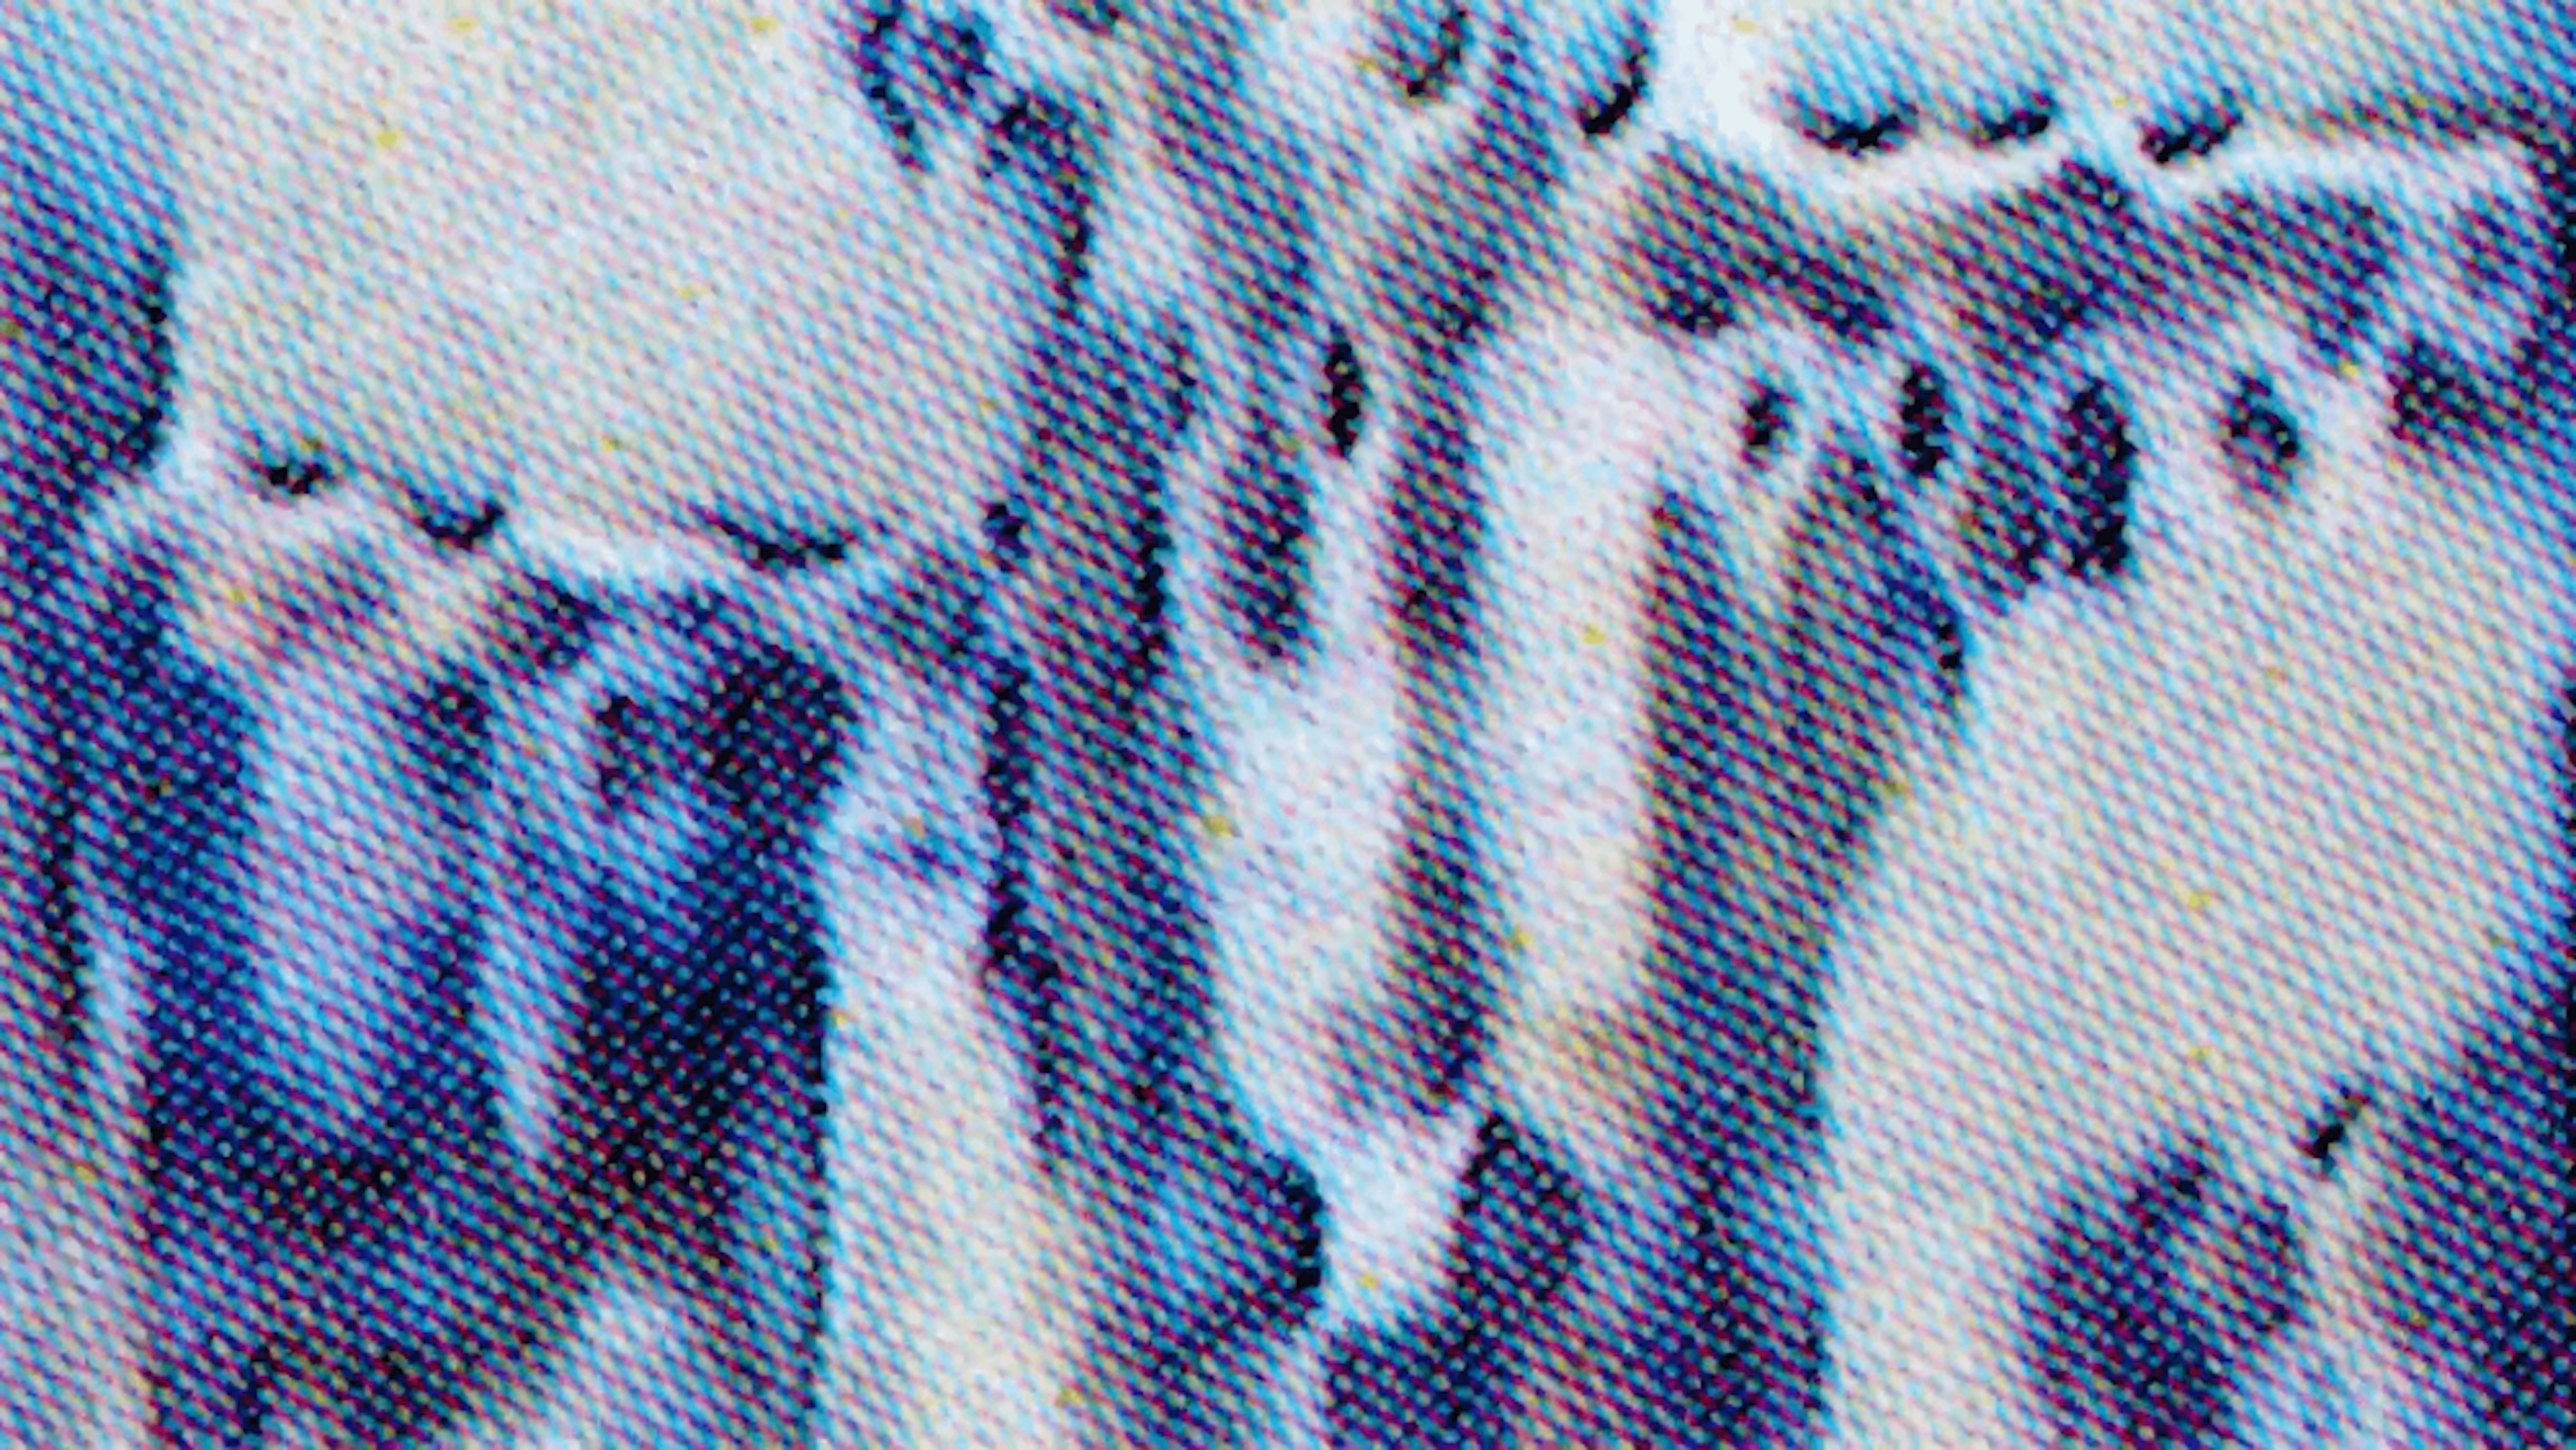 film still showing an abstract watercolour- like image with white a blue colours 